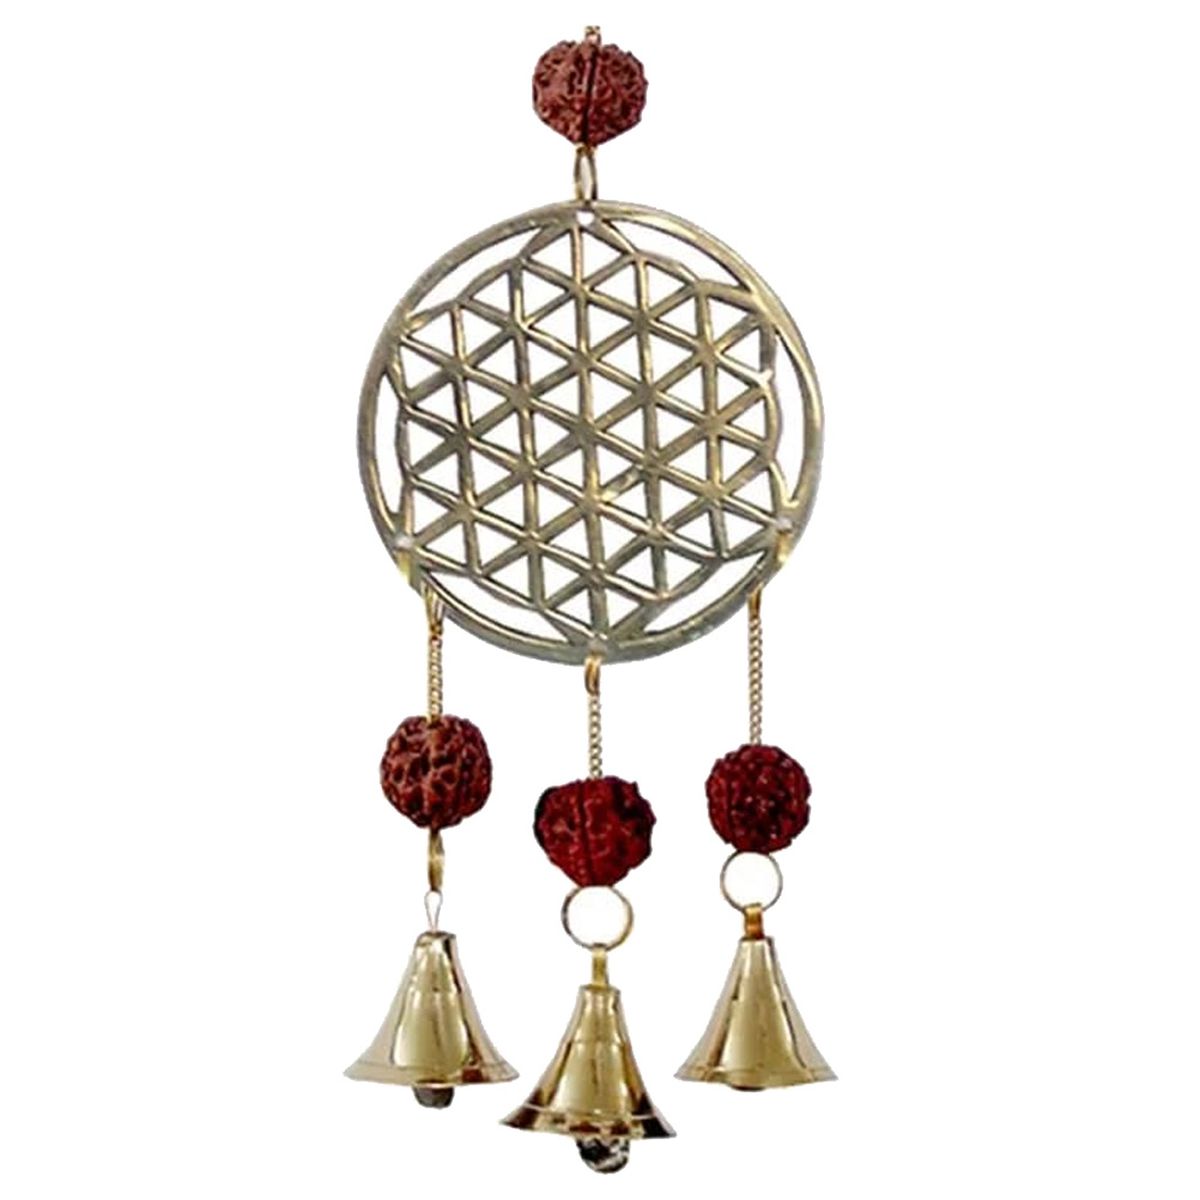 Wind chime Flower of life with Rudraksha beads